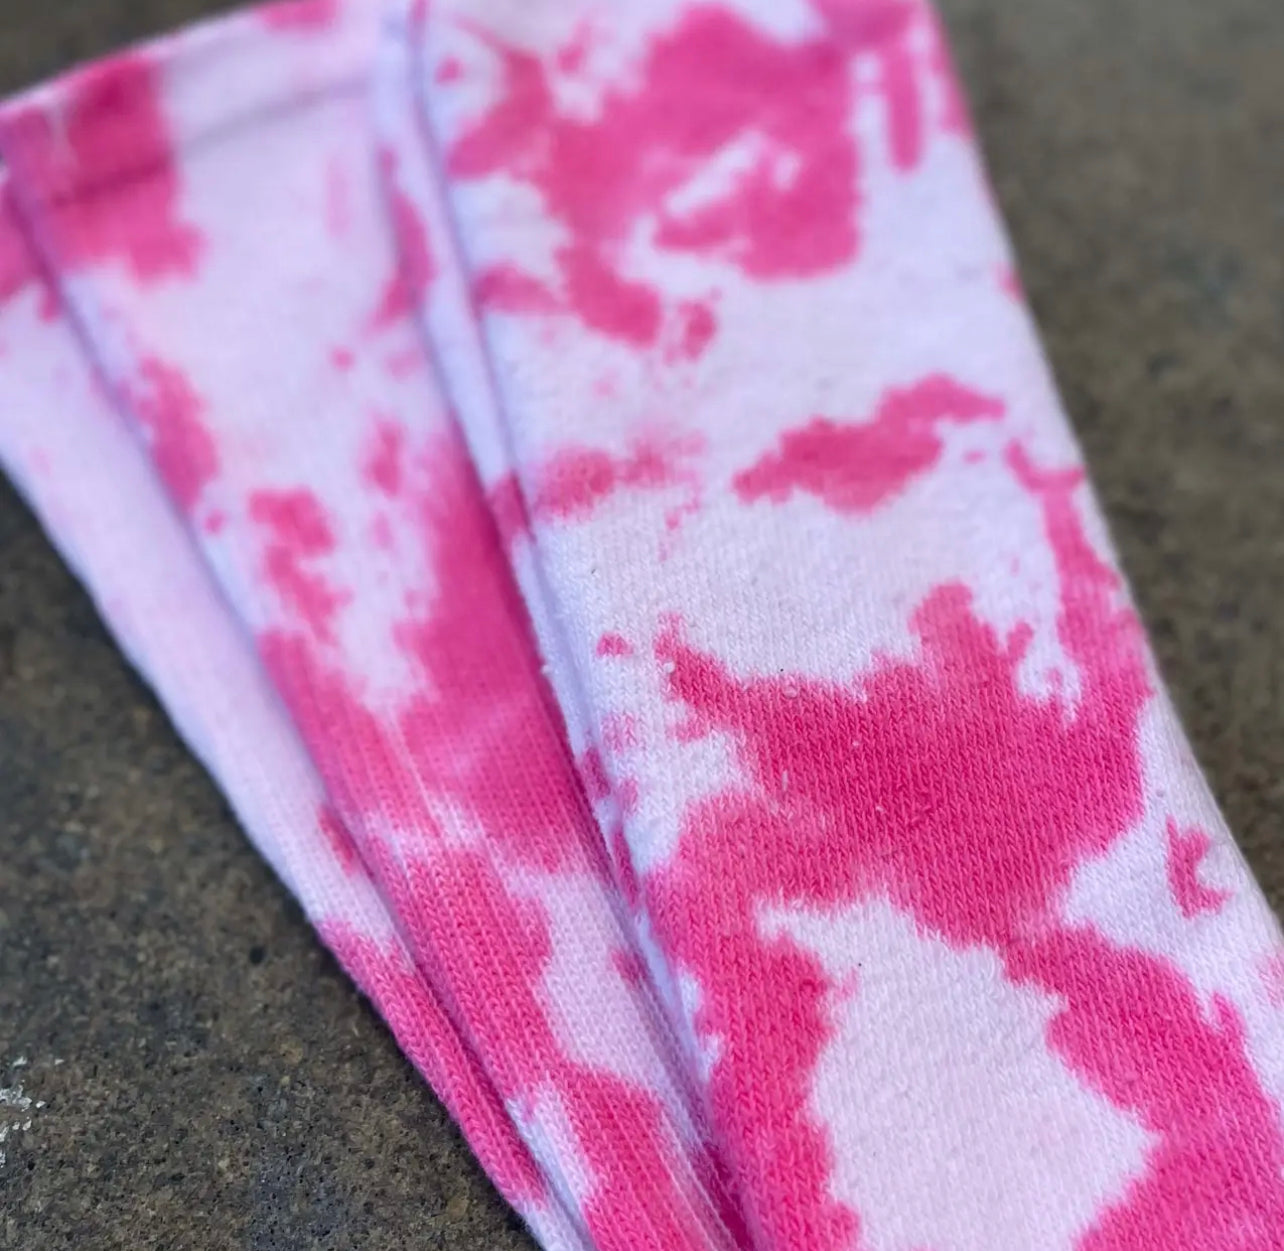 [Warehouse Sale] Tie Dye - Knee High - Sport Socks - Like Soccer/Volleyball- 3Pack for this price!!!